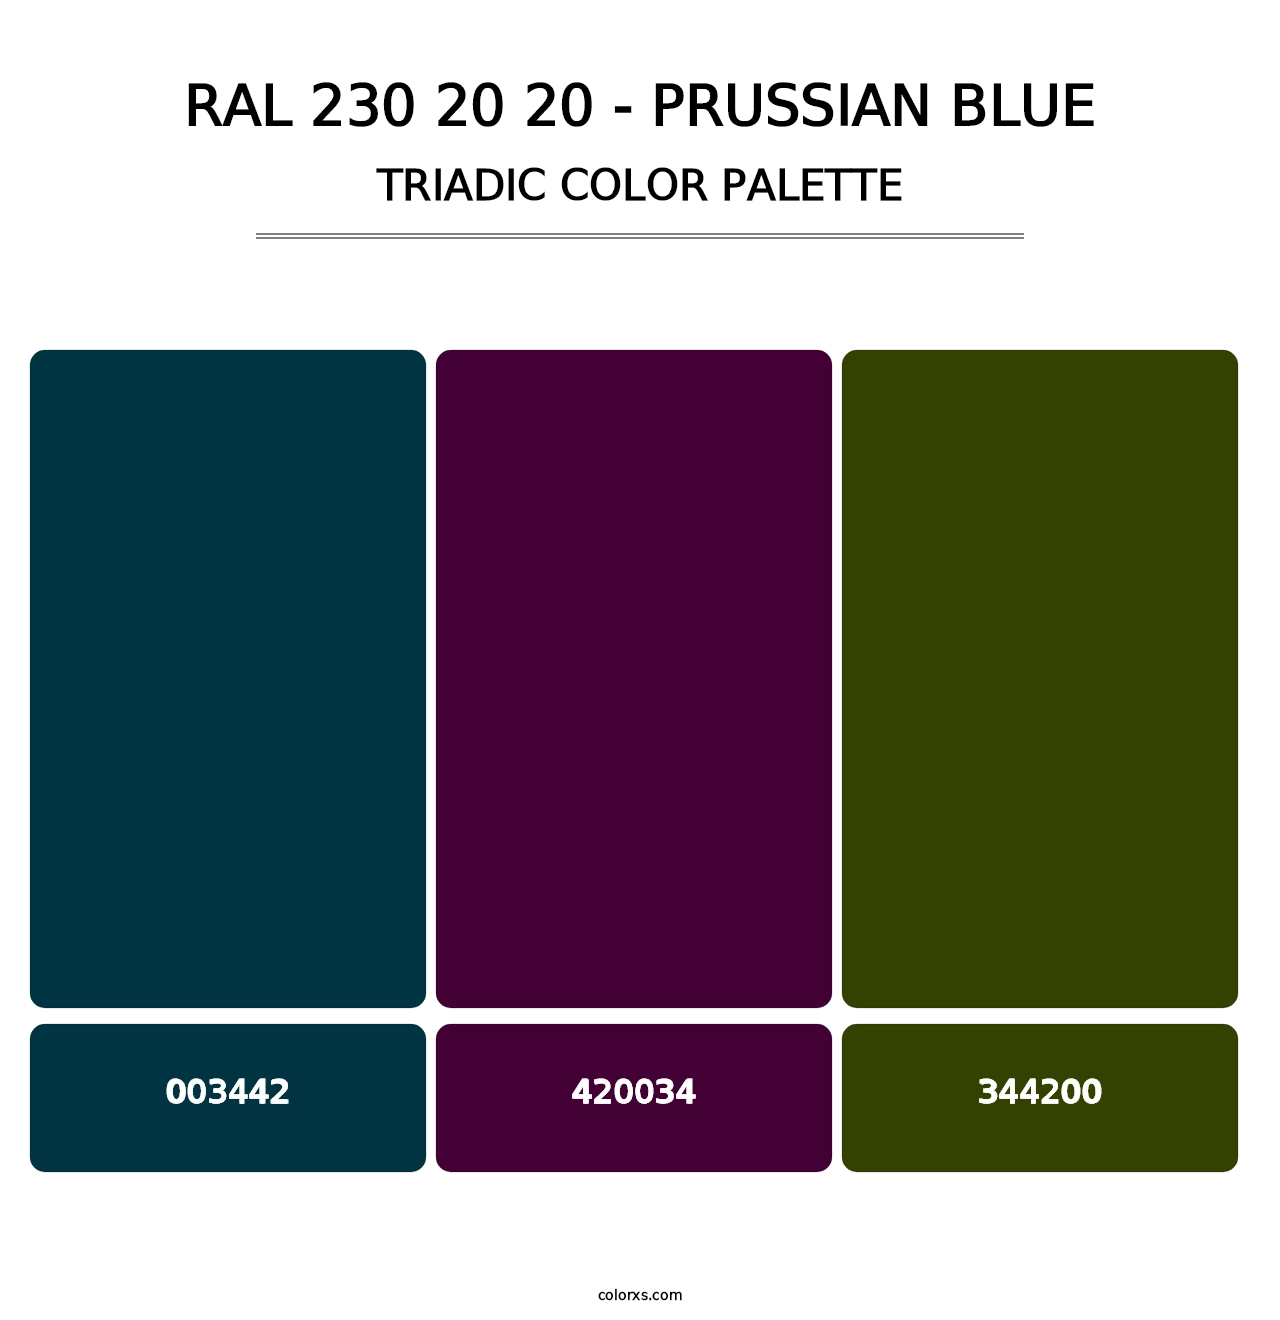 RAL 230 20 20 - Prussian Blue - Triadic Color Palette